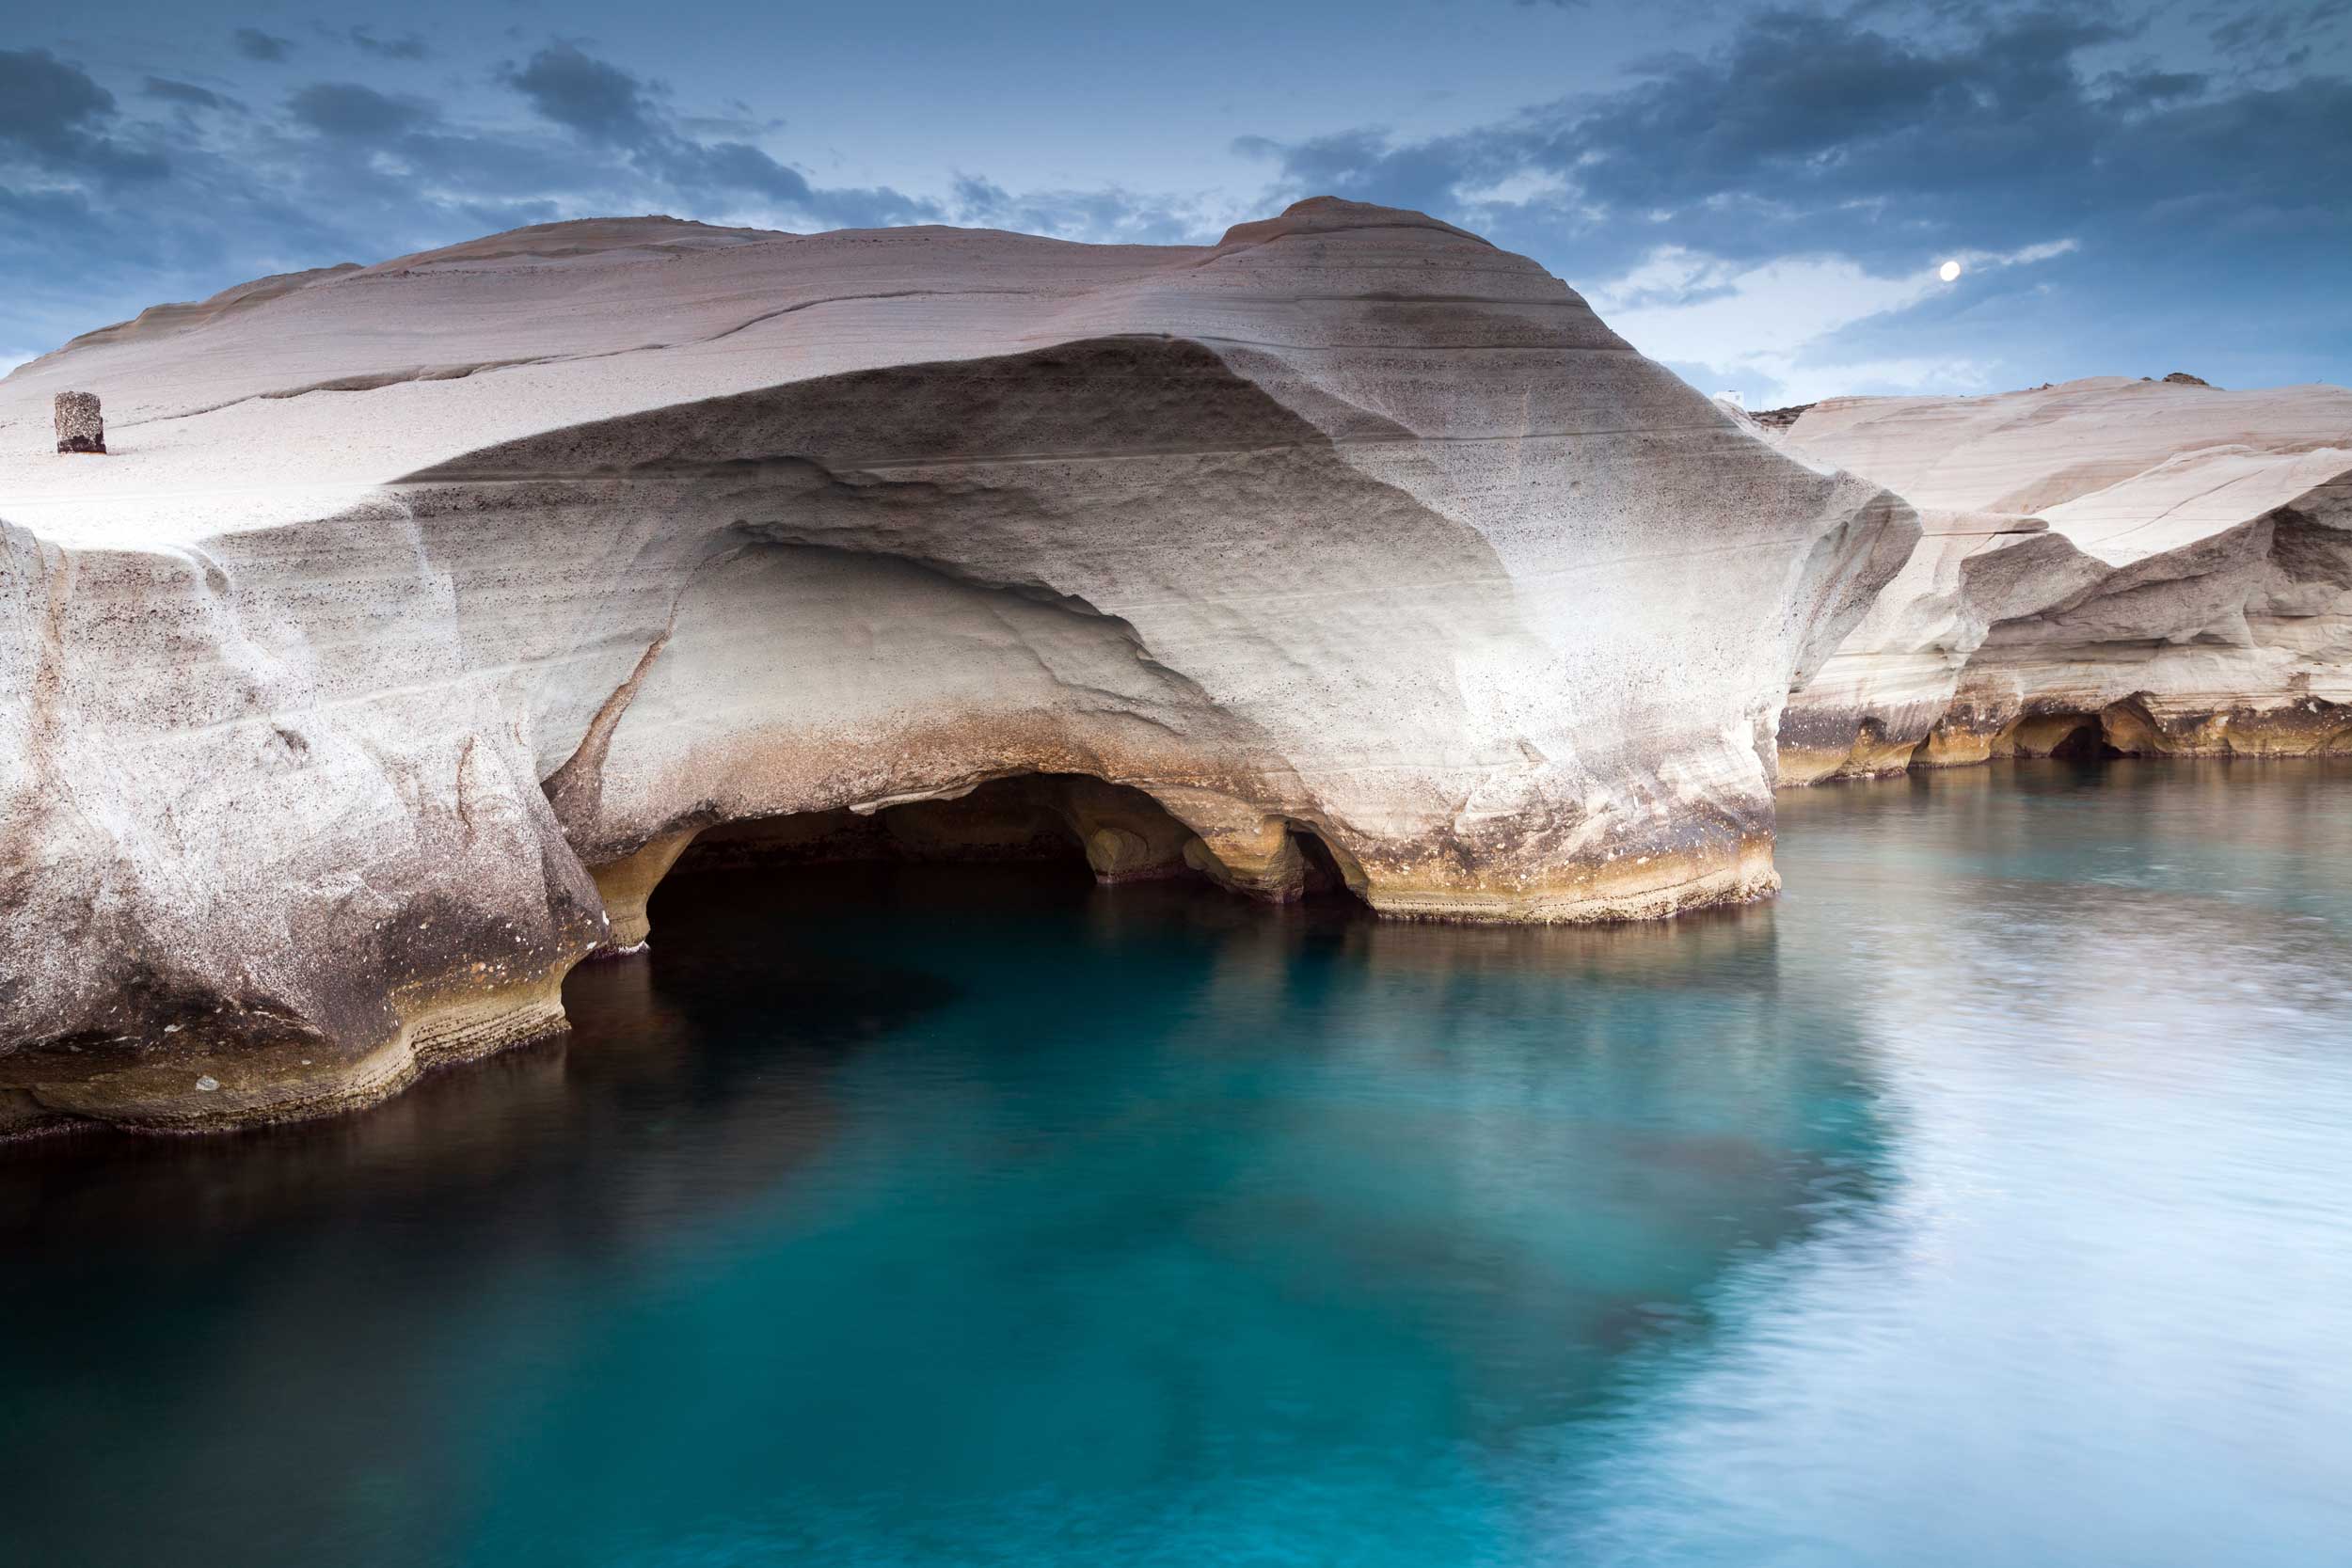 Flat whitish rock arched over a deep aquamarine sea forming a cave, Greece